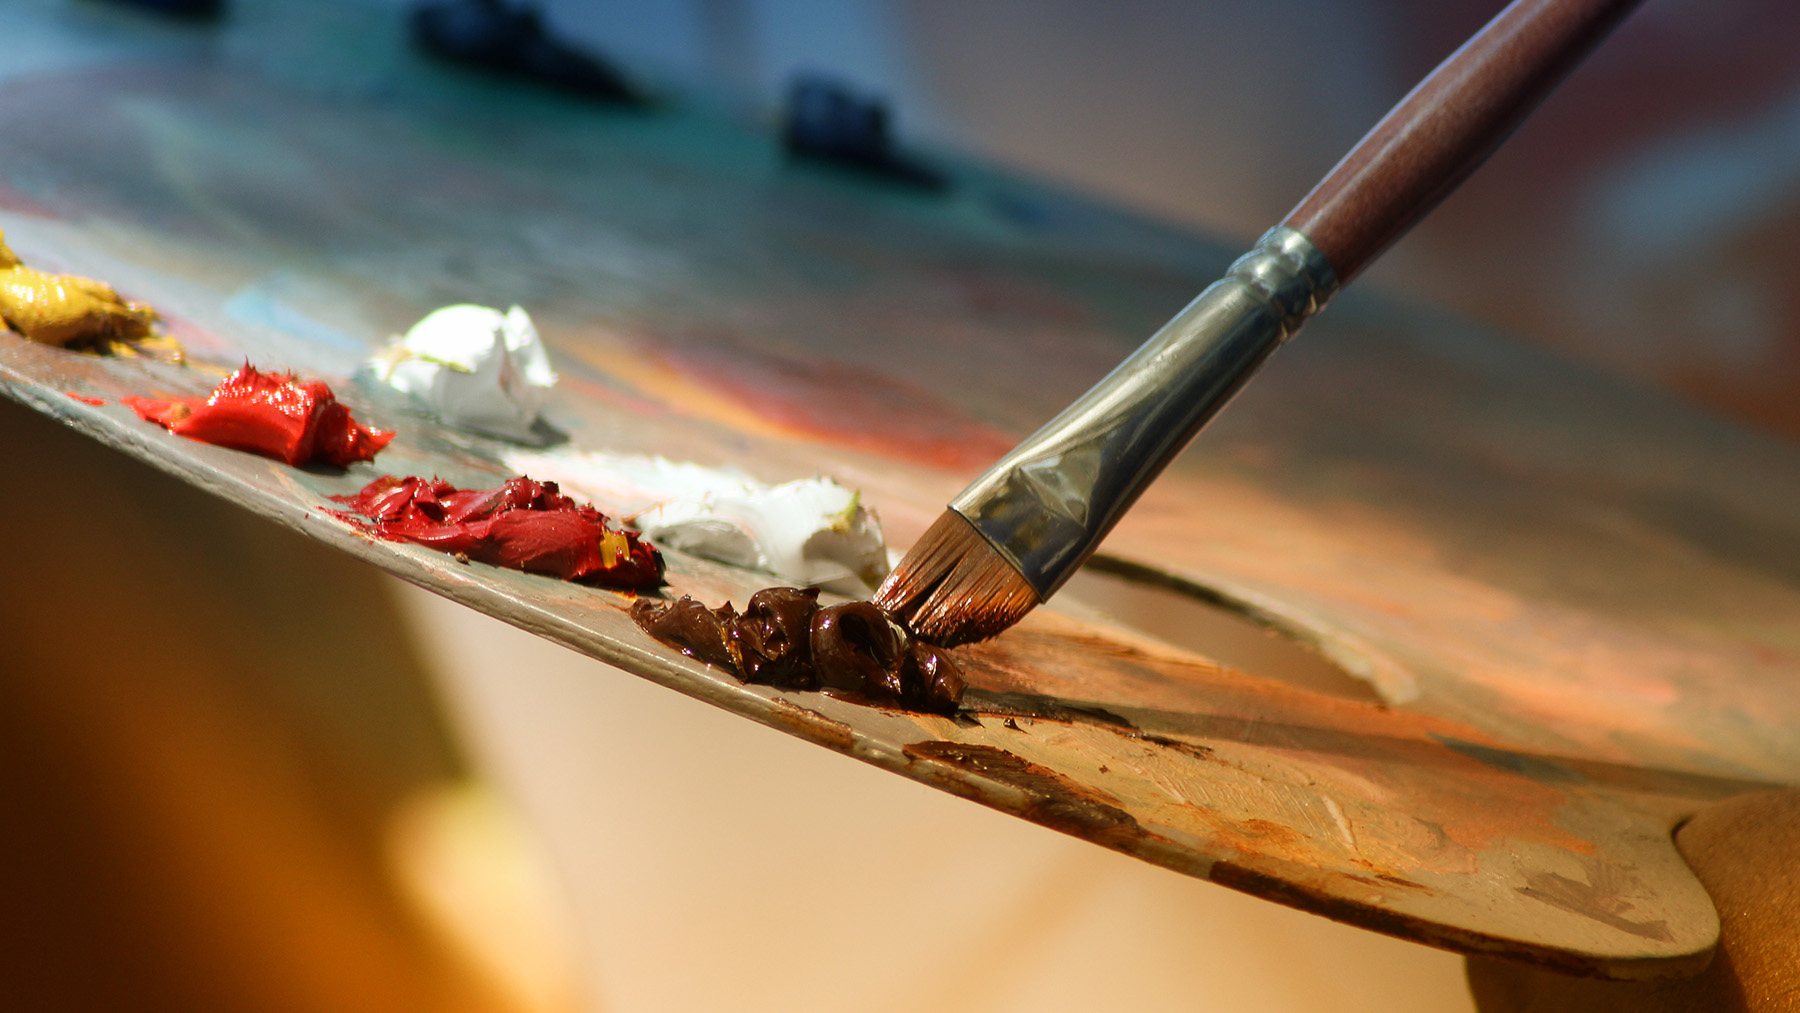 Stock photo of a painter's paint easel and brush (Image from Creative Commons)